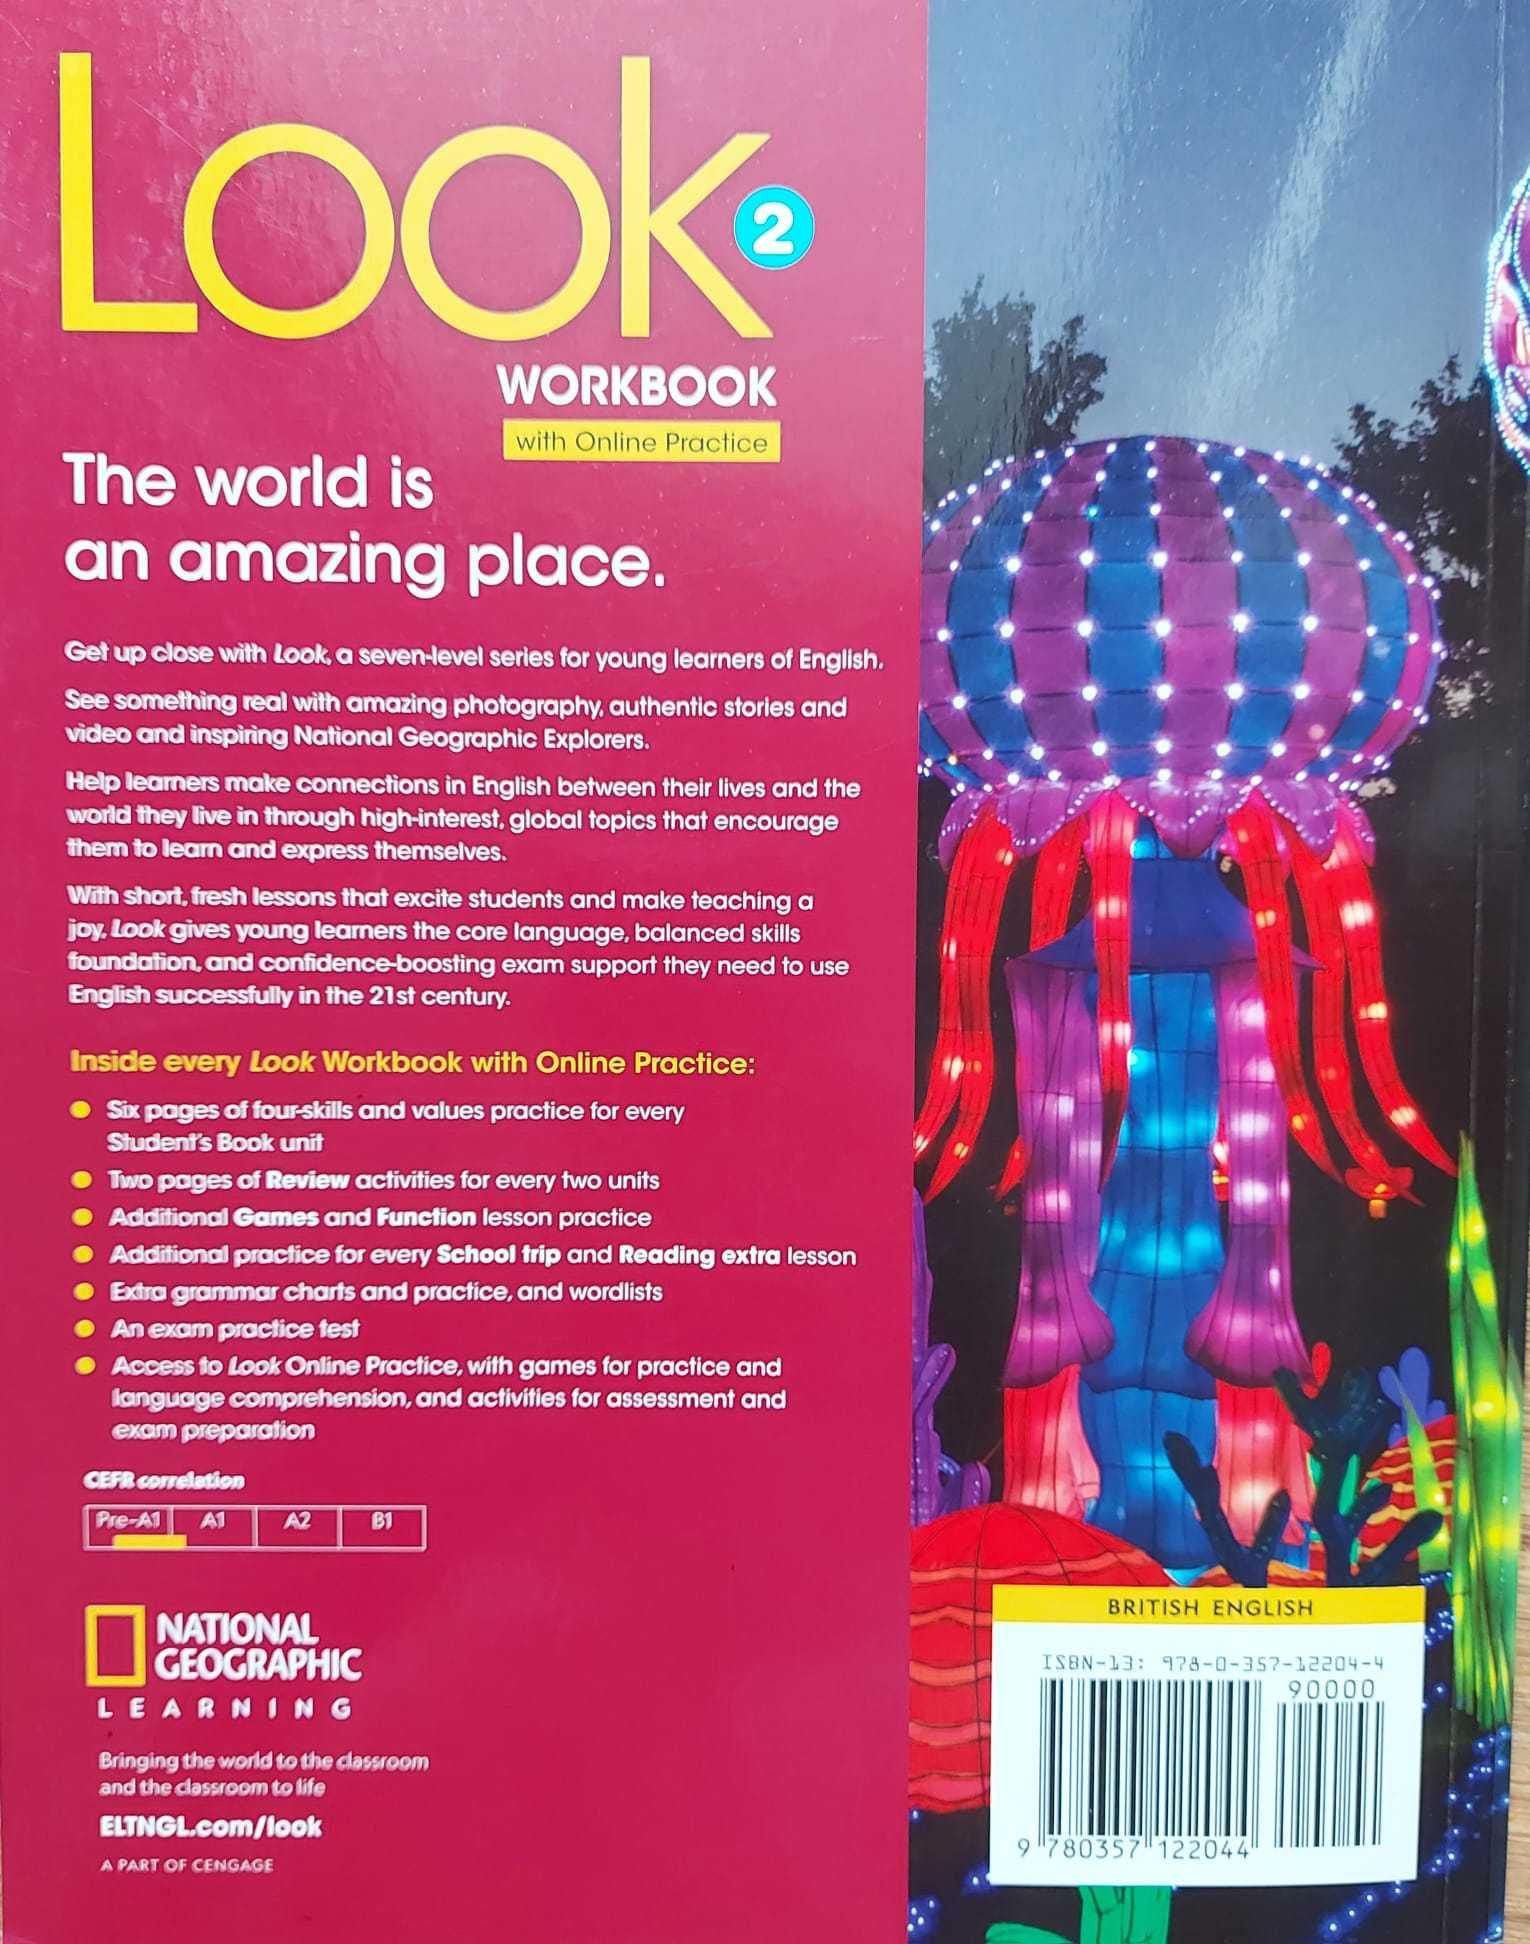 LOOK 2 Student’s Book & Workbook, 1st Edition- National Geographic